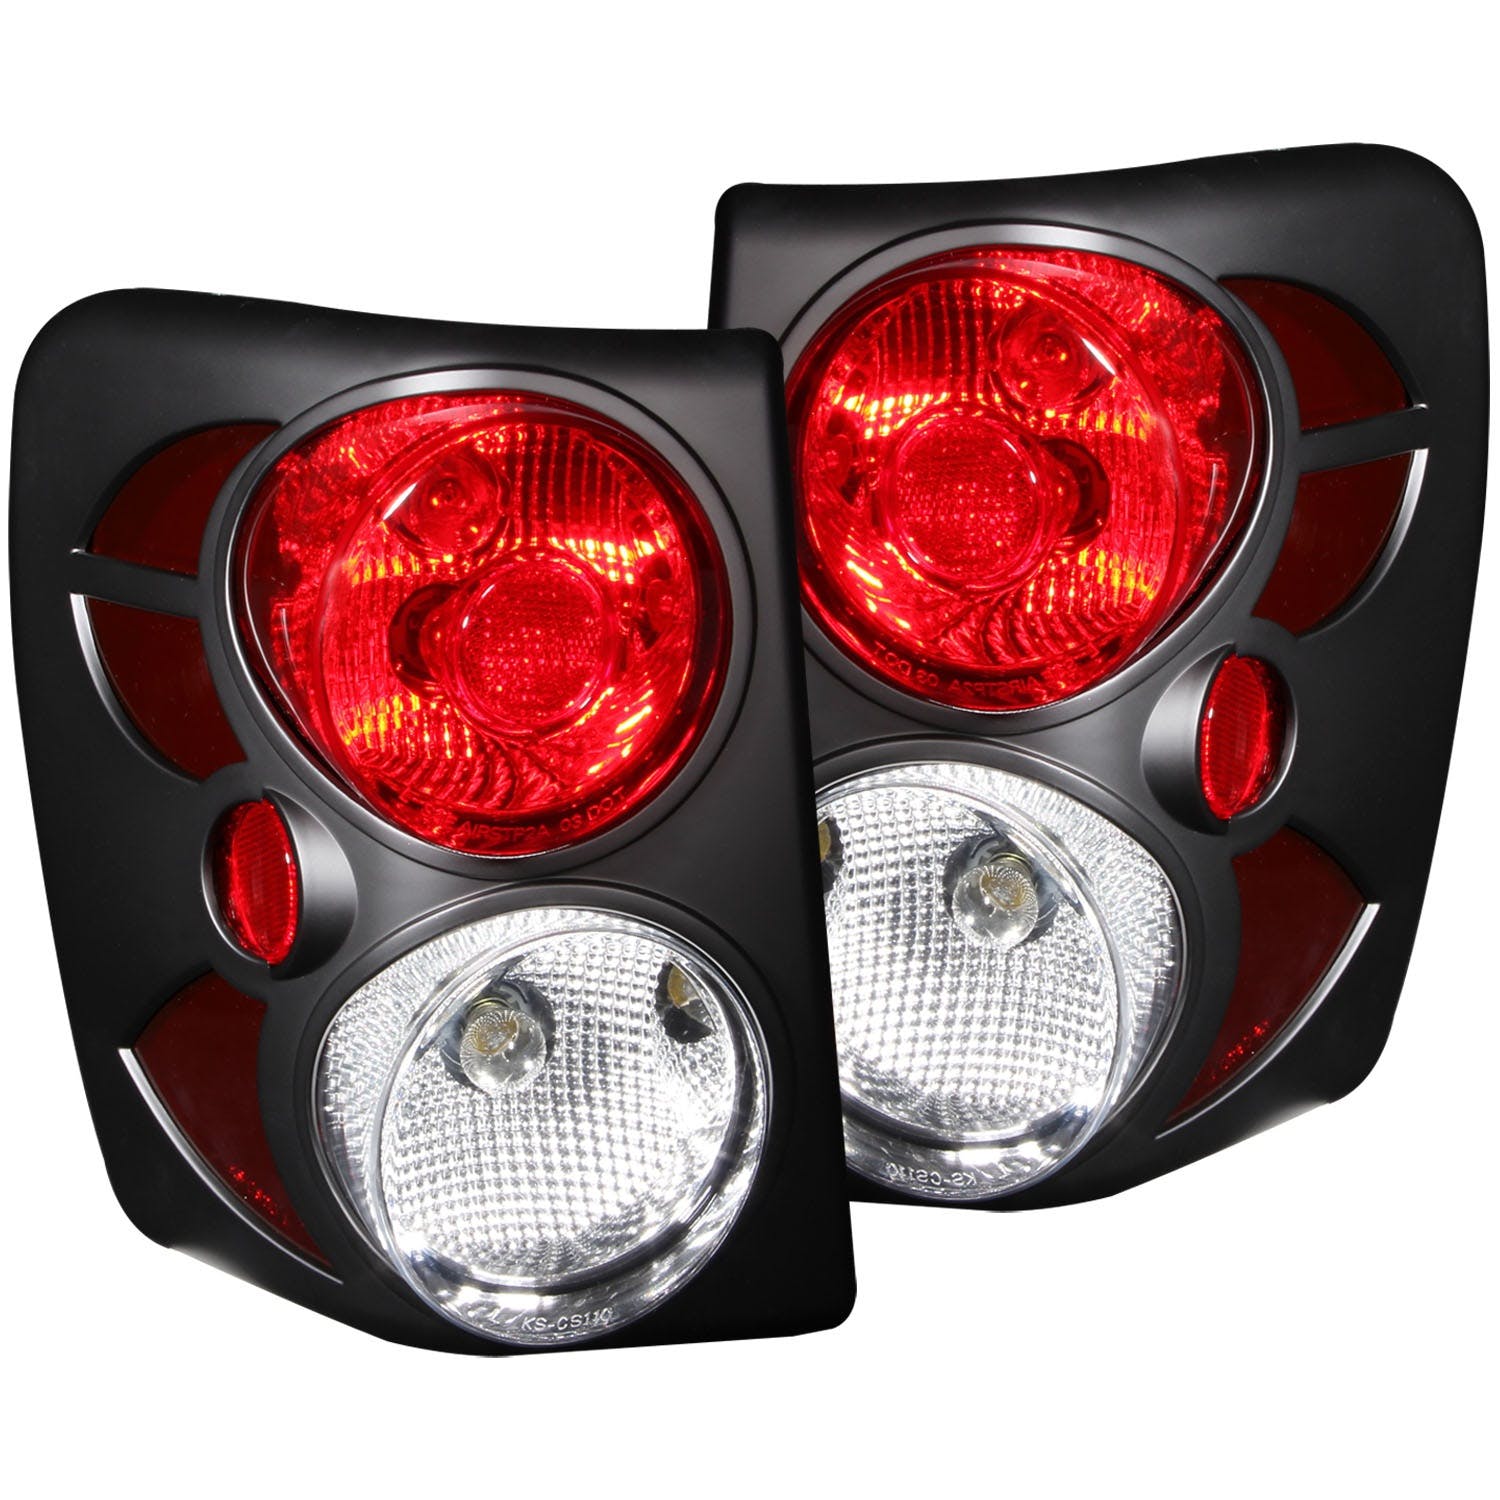 AnzoUSA 211105 Taillights Black